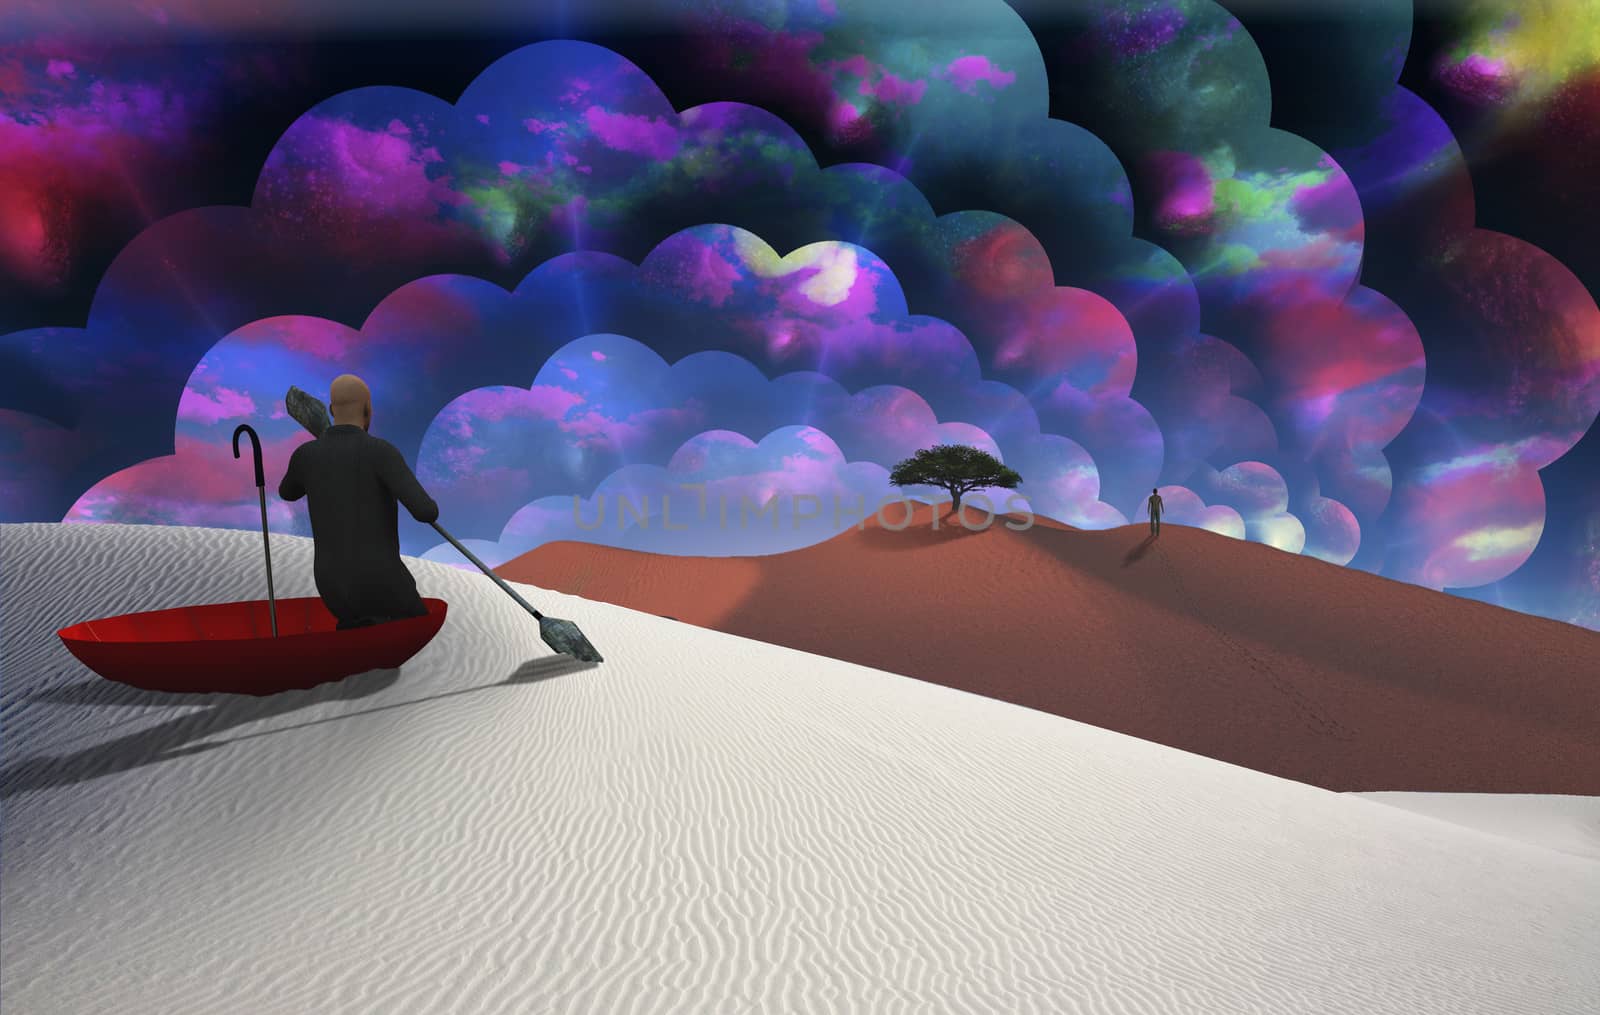 Surreal painting. Man in red umbrella floating on white desert. Figure of man in a distance. Multilayered spaces represents endless dimensions.